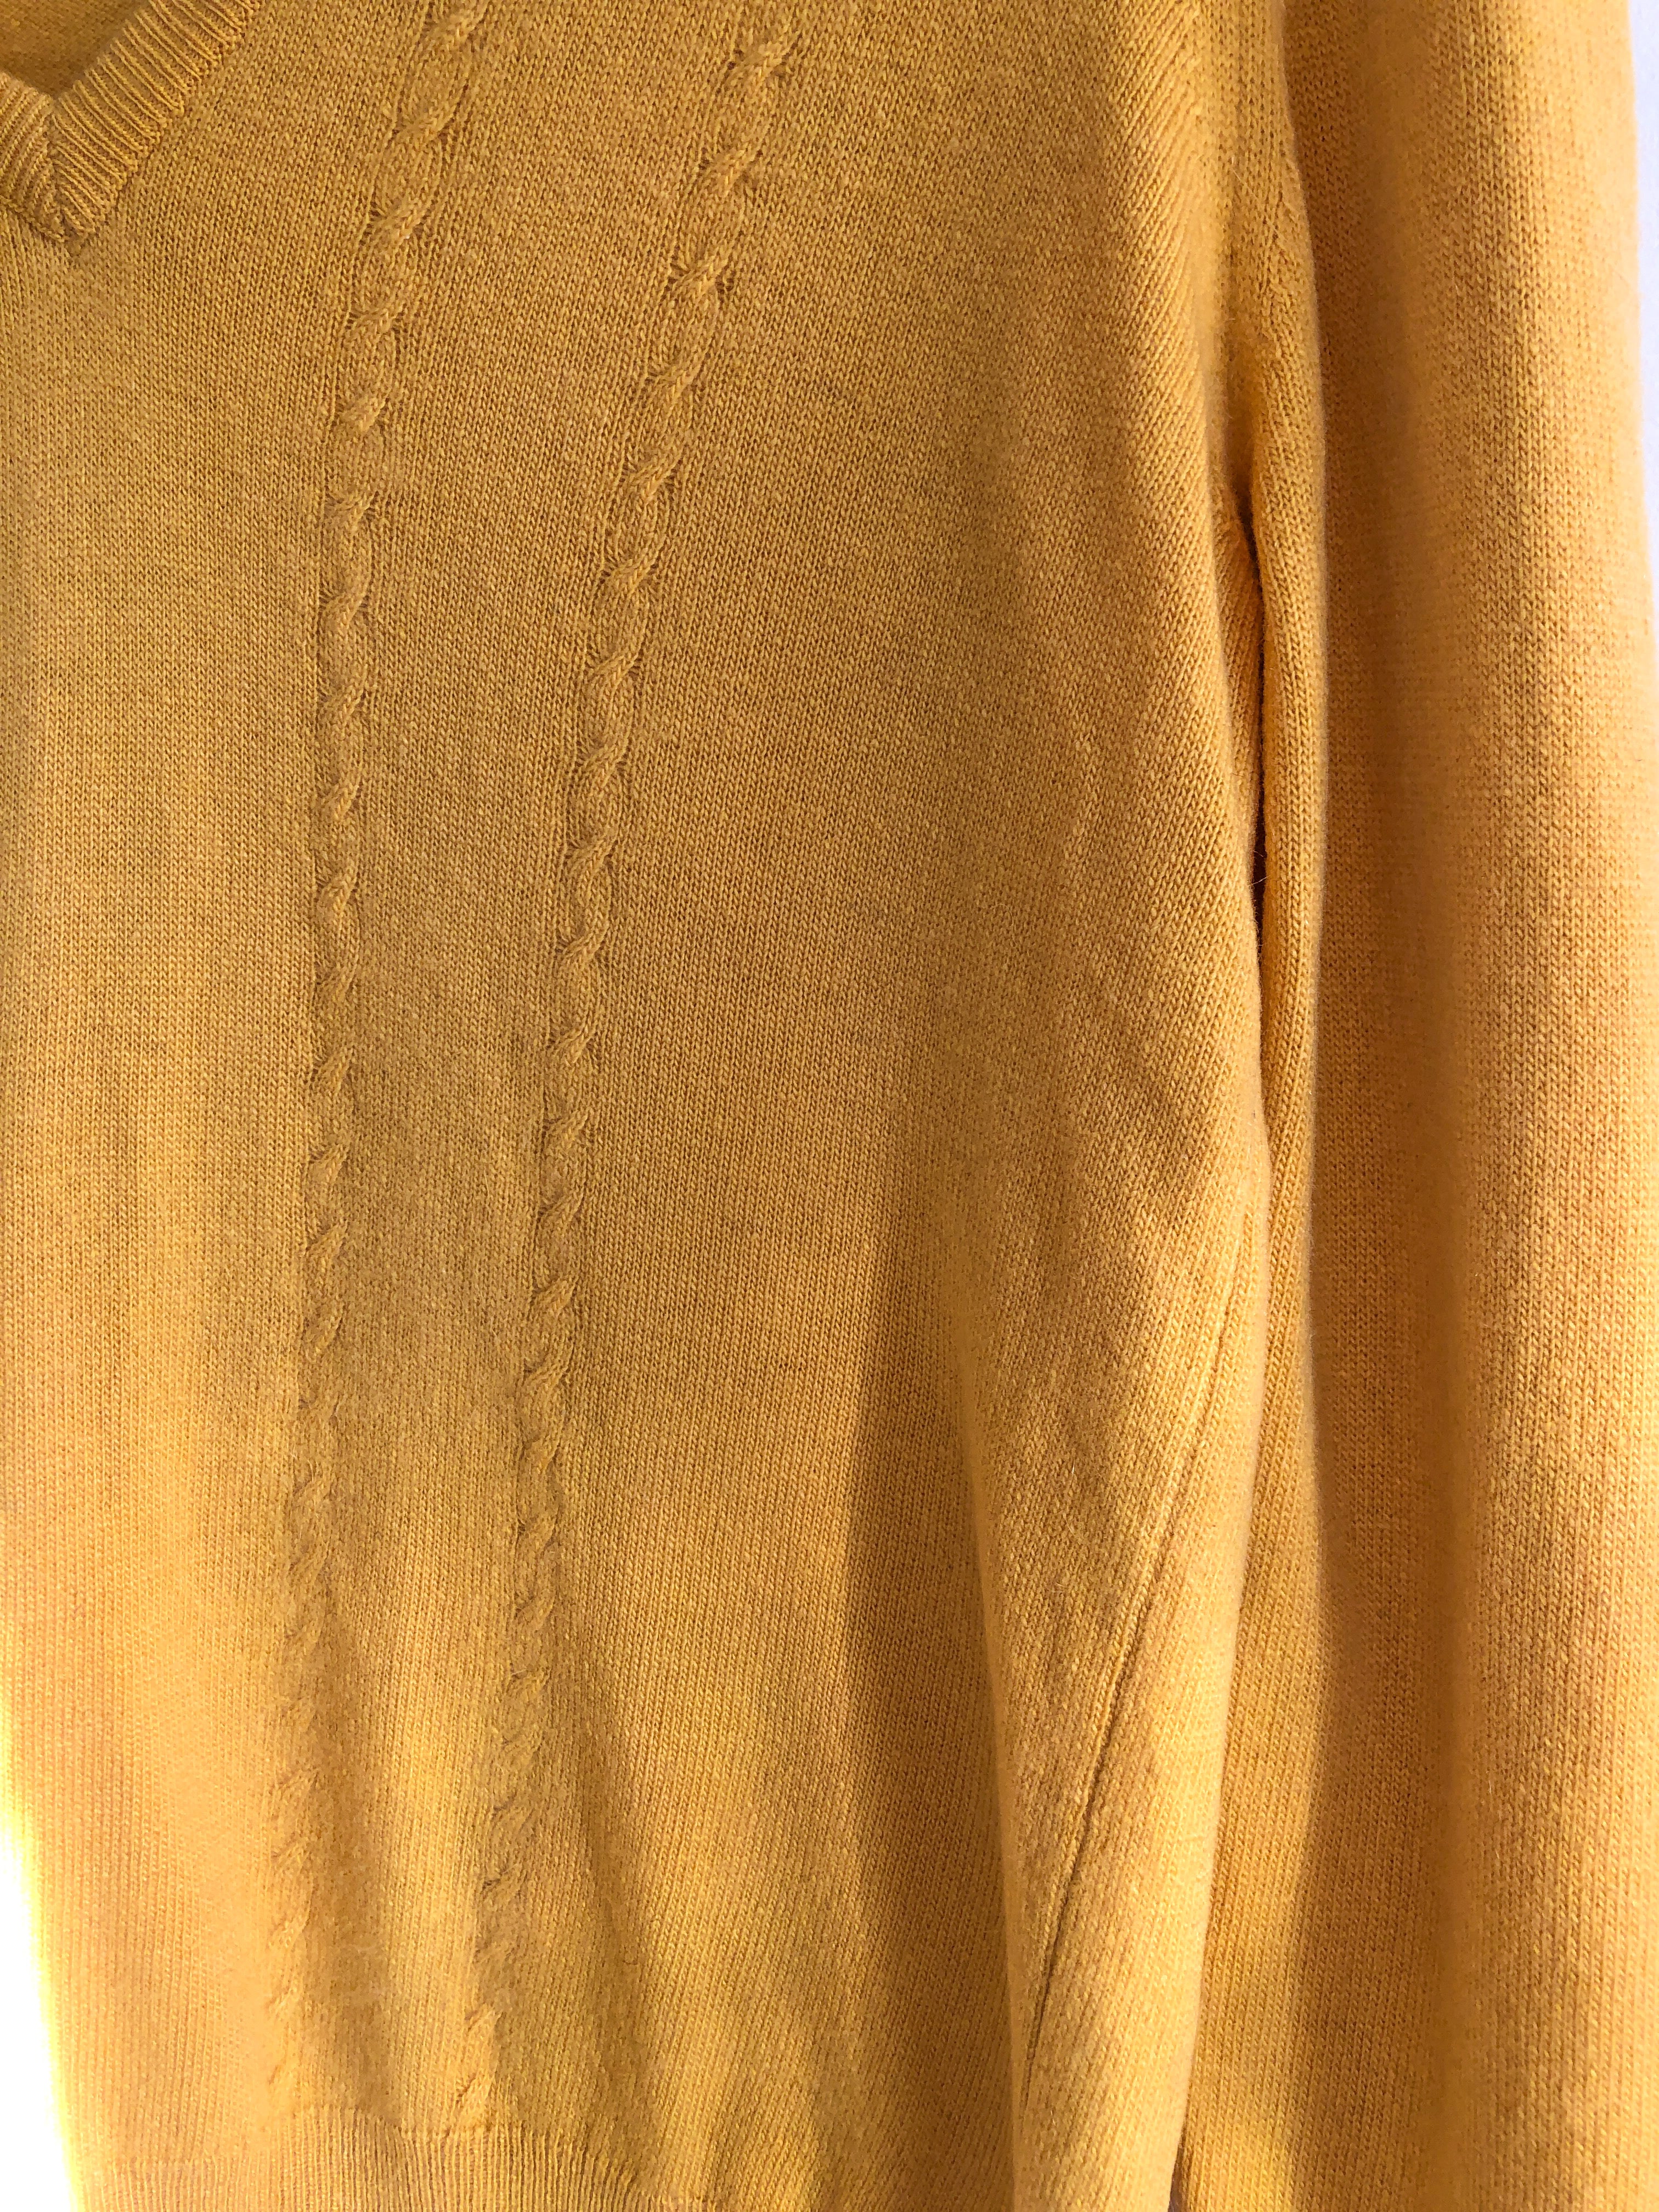 Mustard Yellow Cashmere Sweater, Cable Knit V Neck By Hawico of Scotland for Jenners